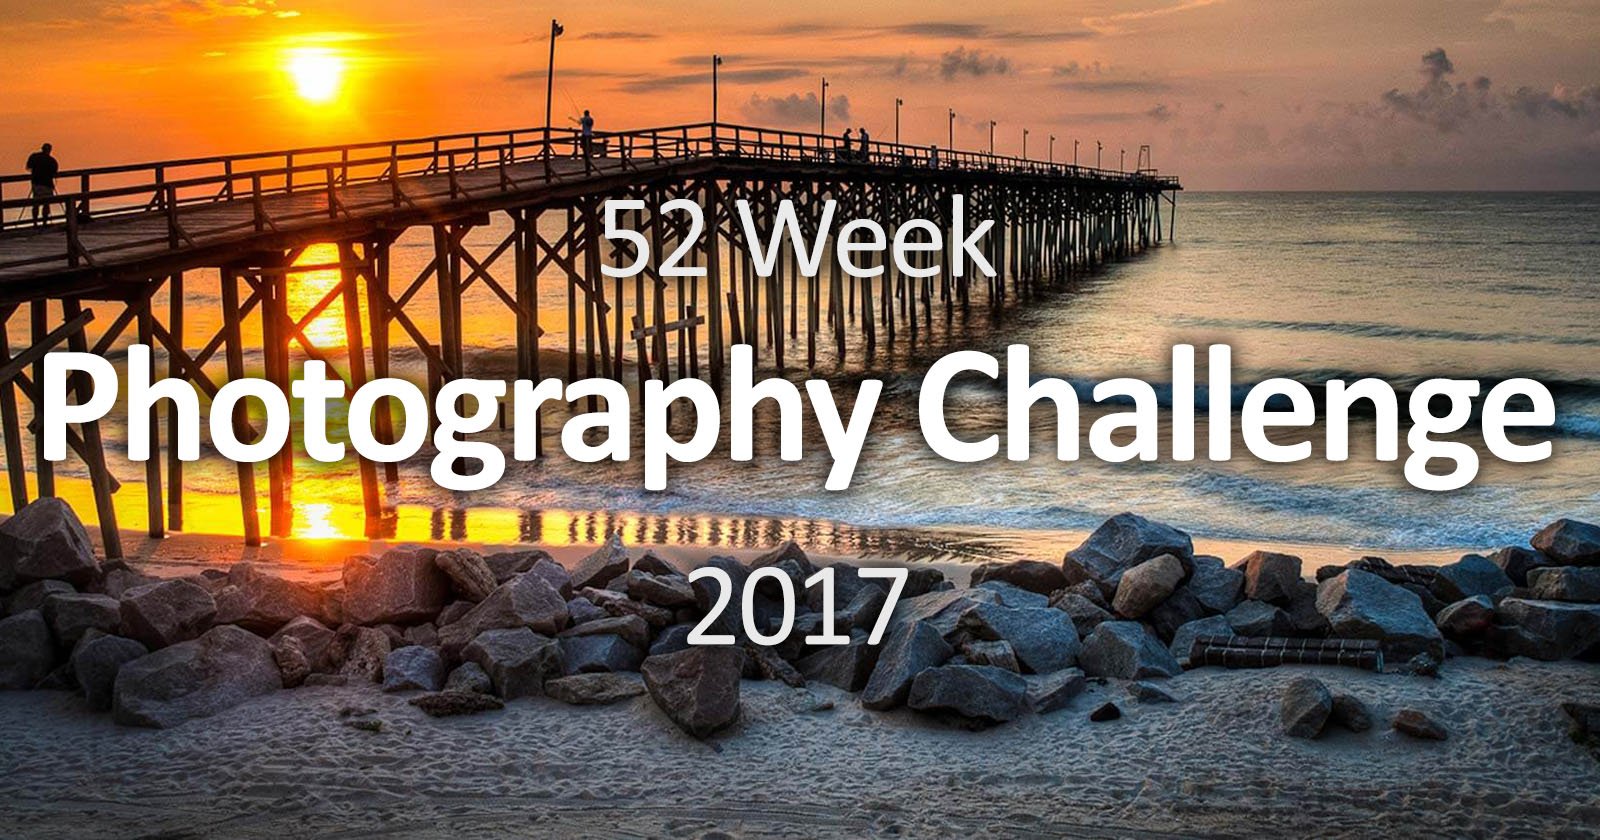 Shoot This 52 Week Photo Challenge in 2017 to Improve Your Skills